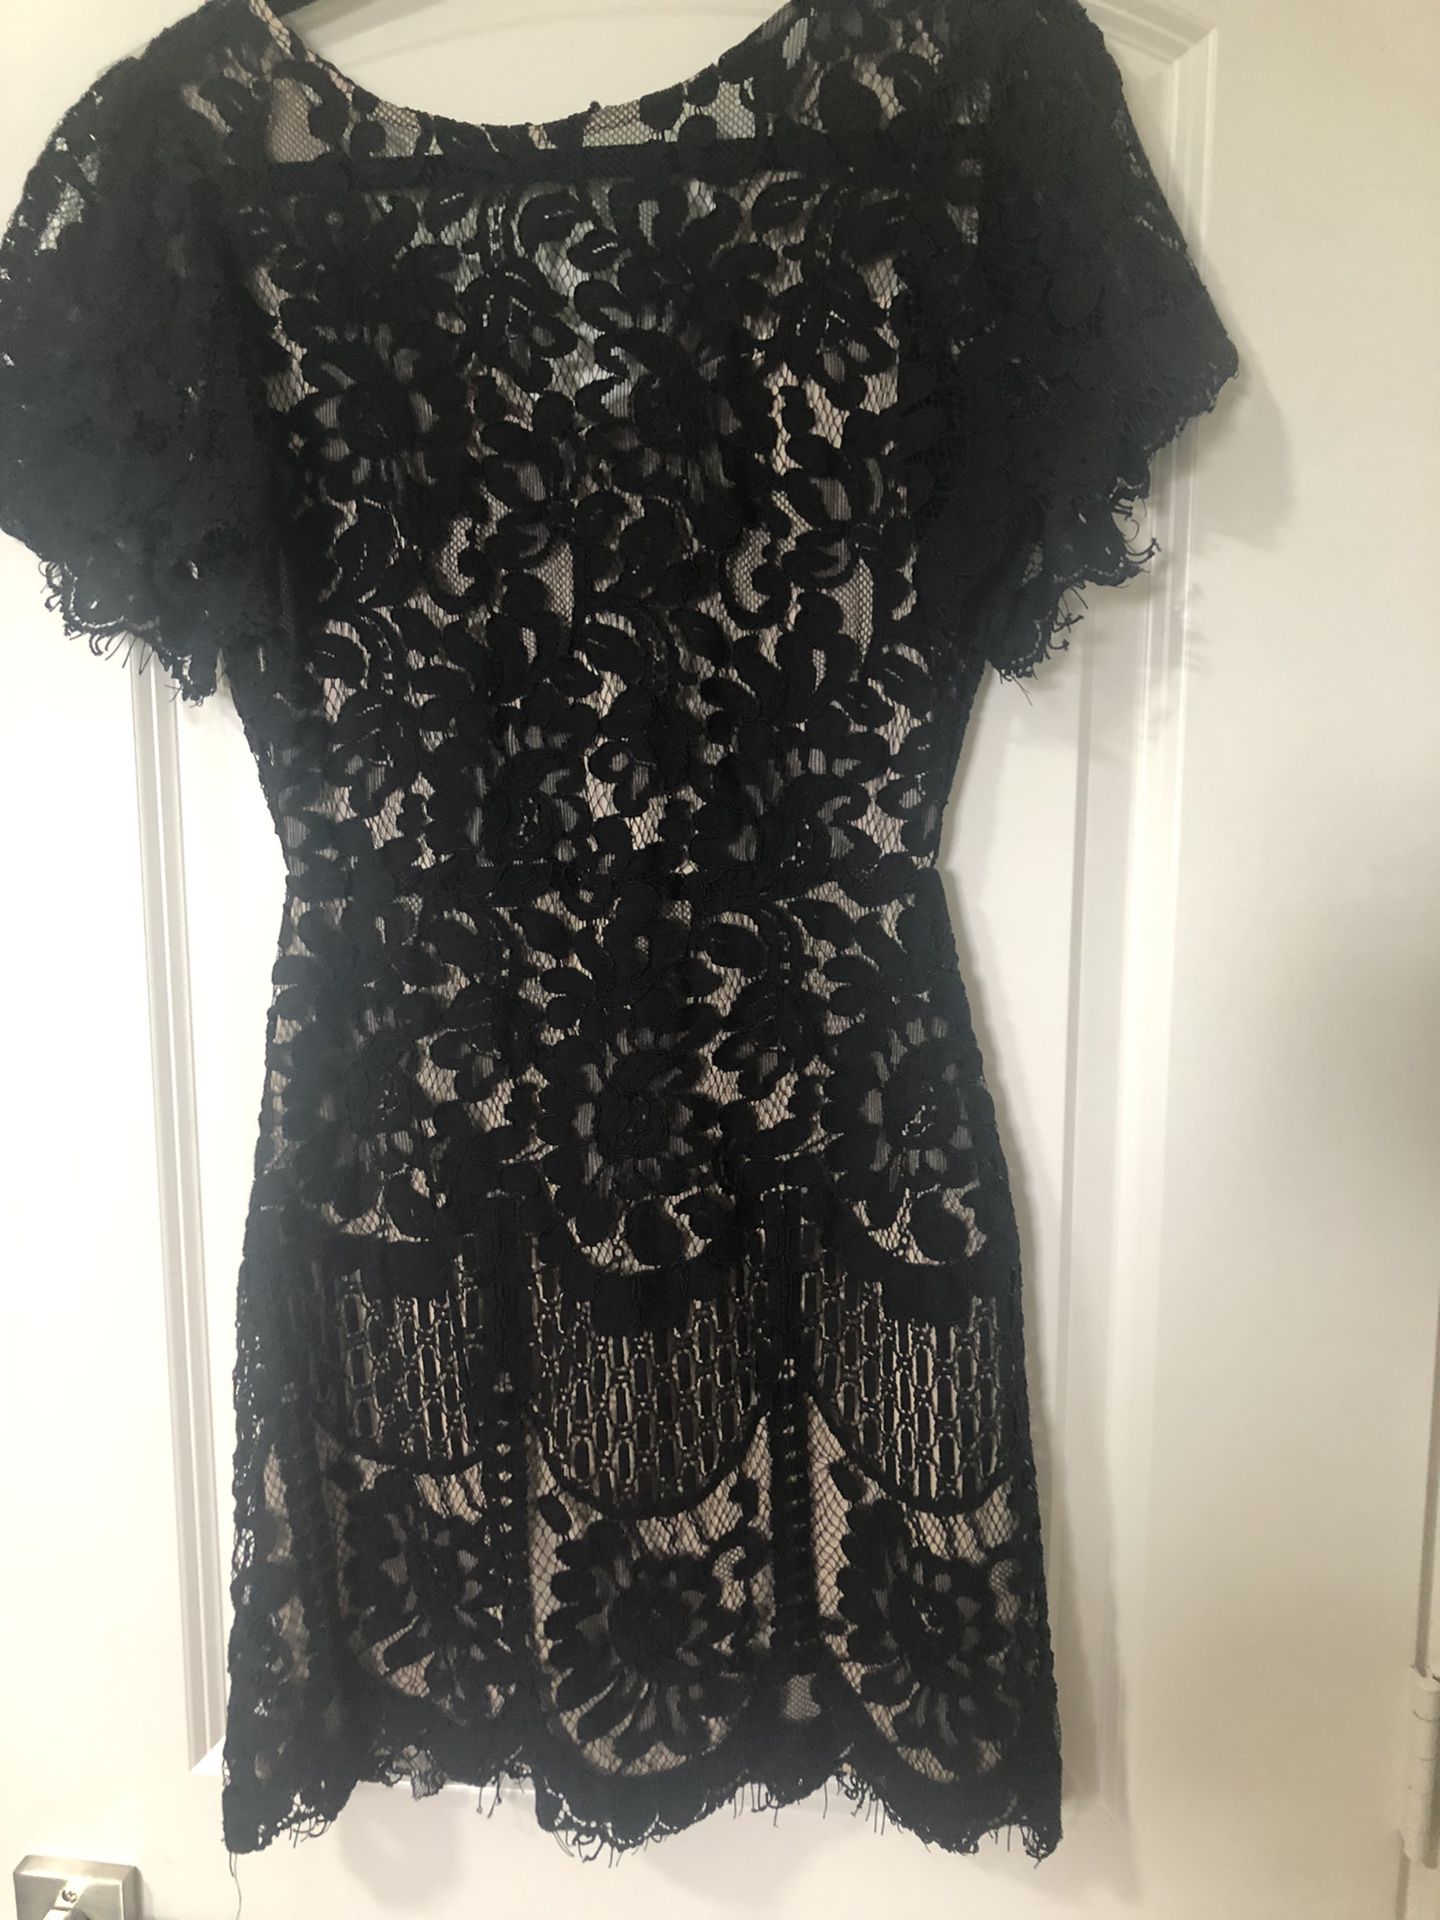 Black lace cocktail dress. Black lace with nude underlay.